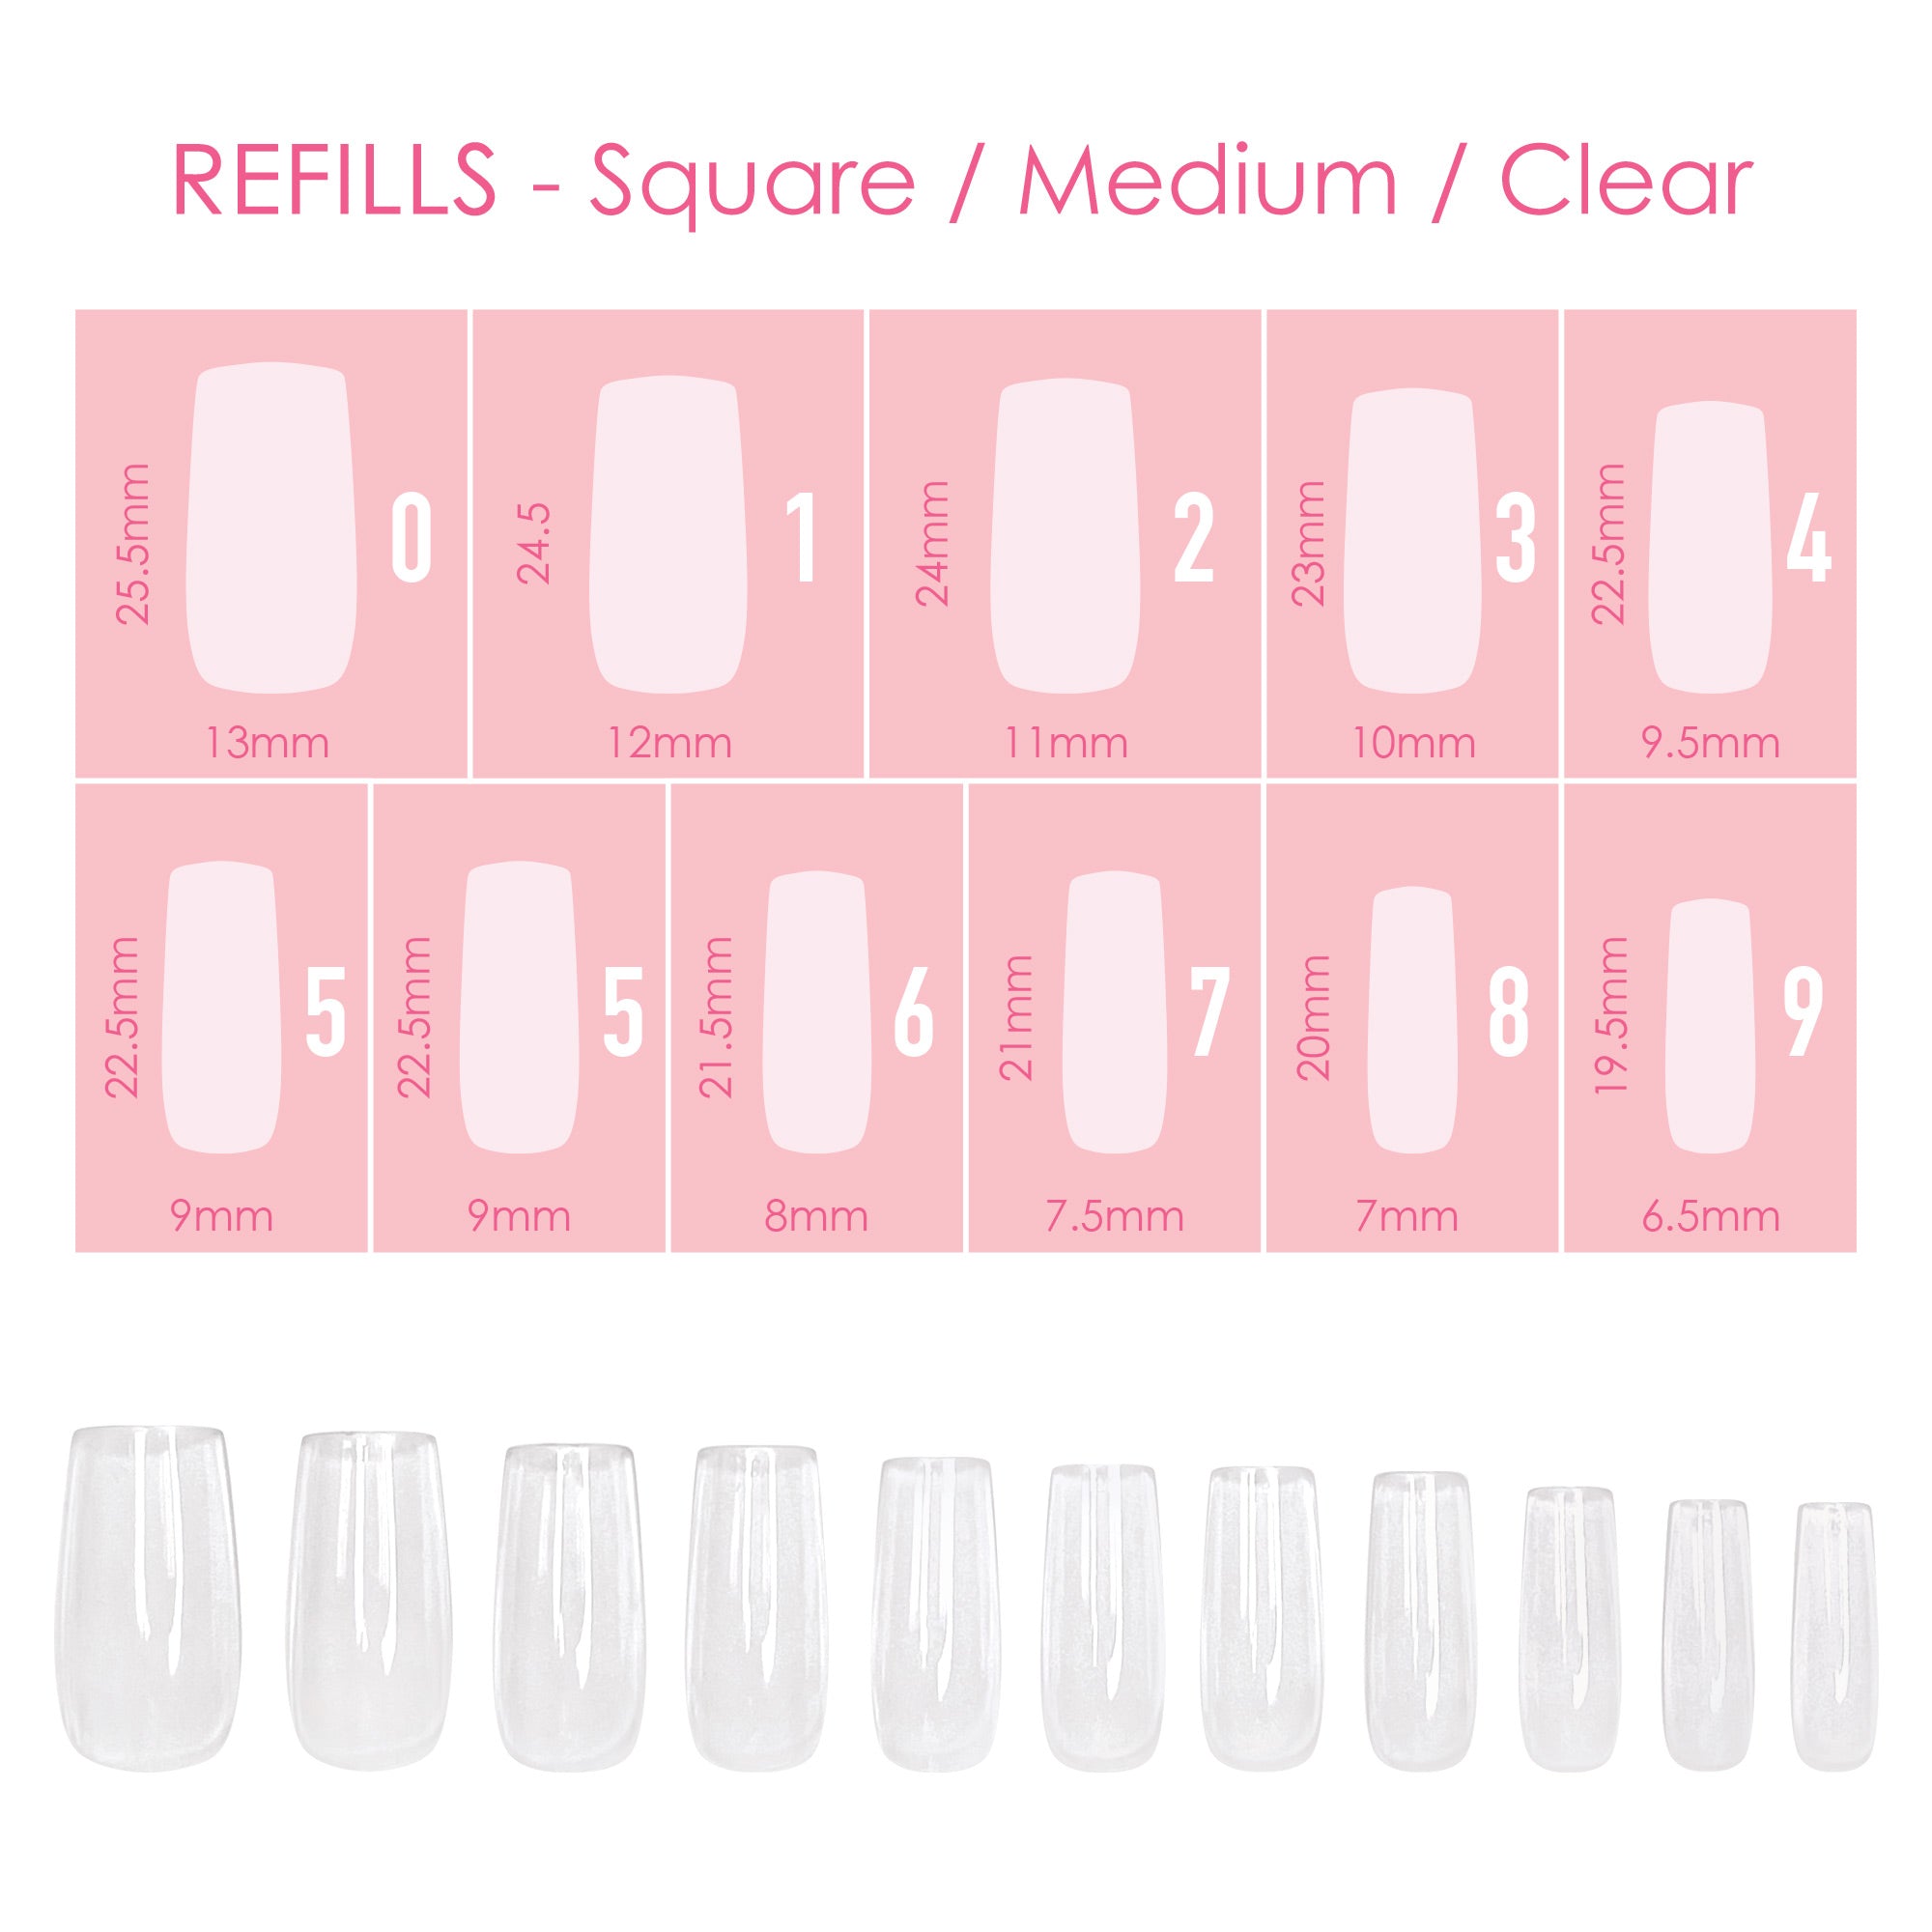 Charme Gel Extension Tips Refill / Square / Medium / Clear